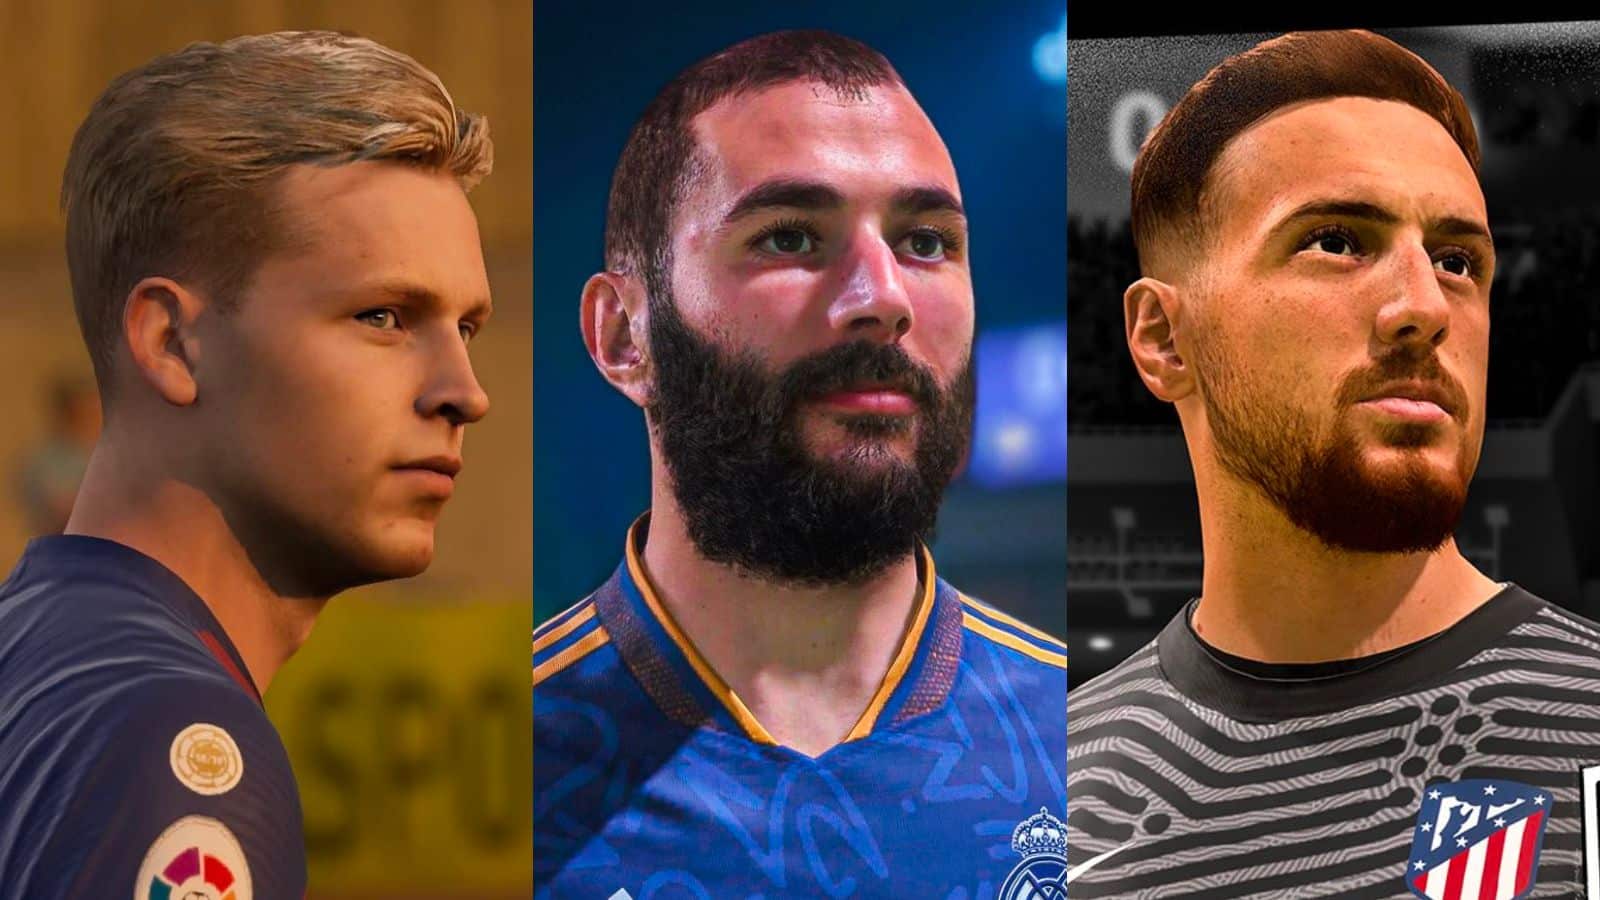 FIFA 23 player ratings, including the best players ranked by